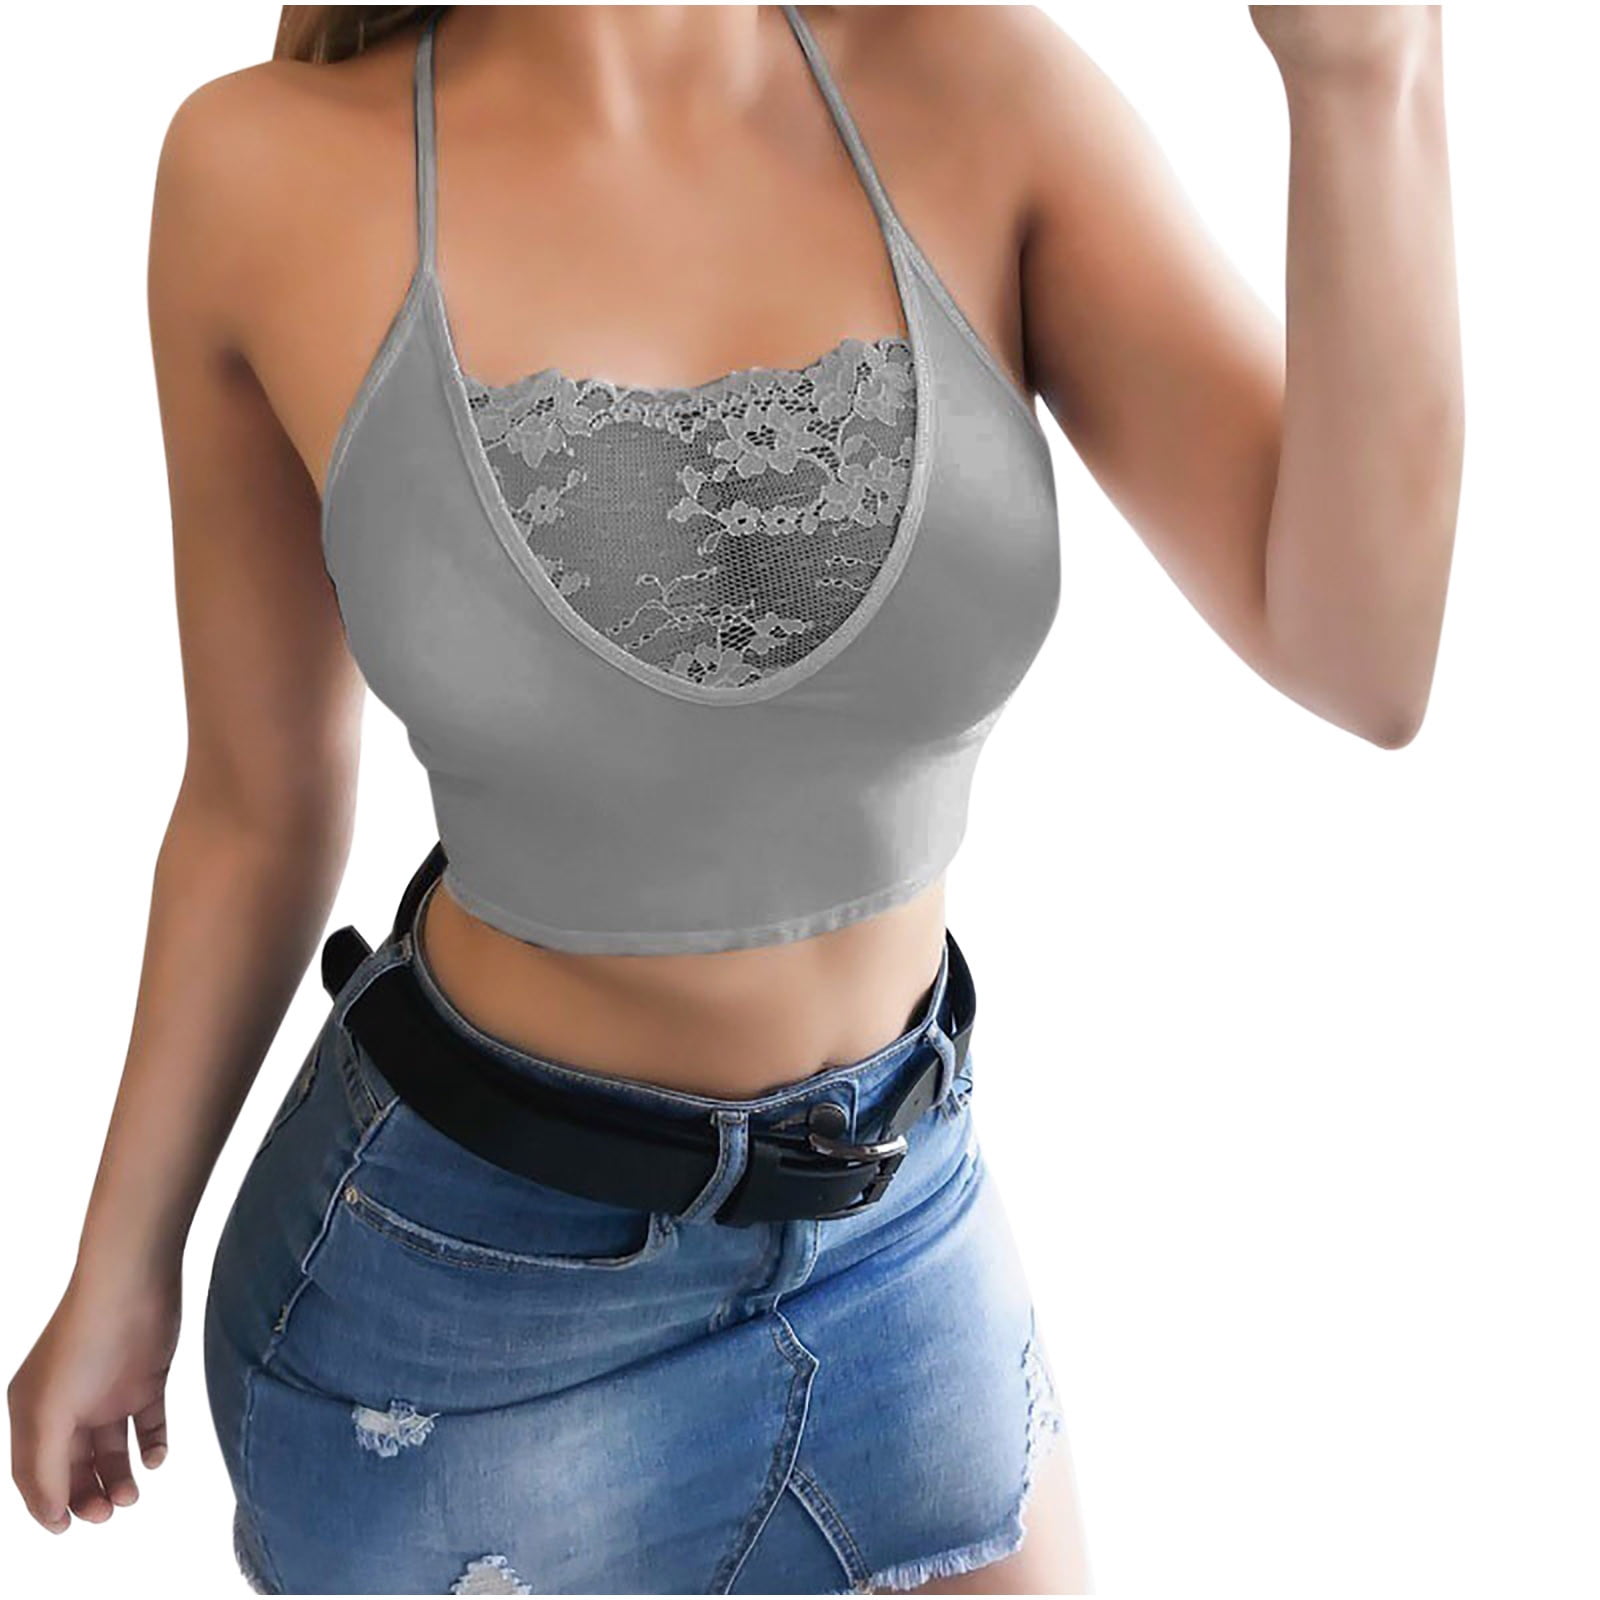 alyssa chowdhury recommends Crop Tops For Large Breasts